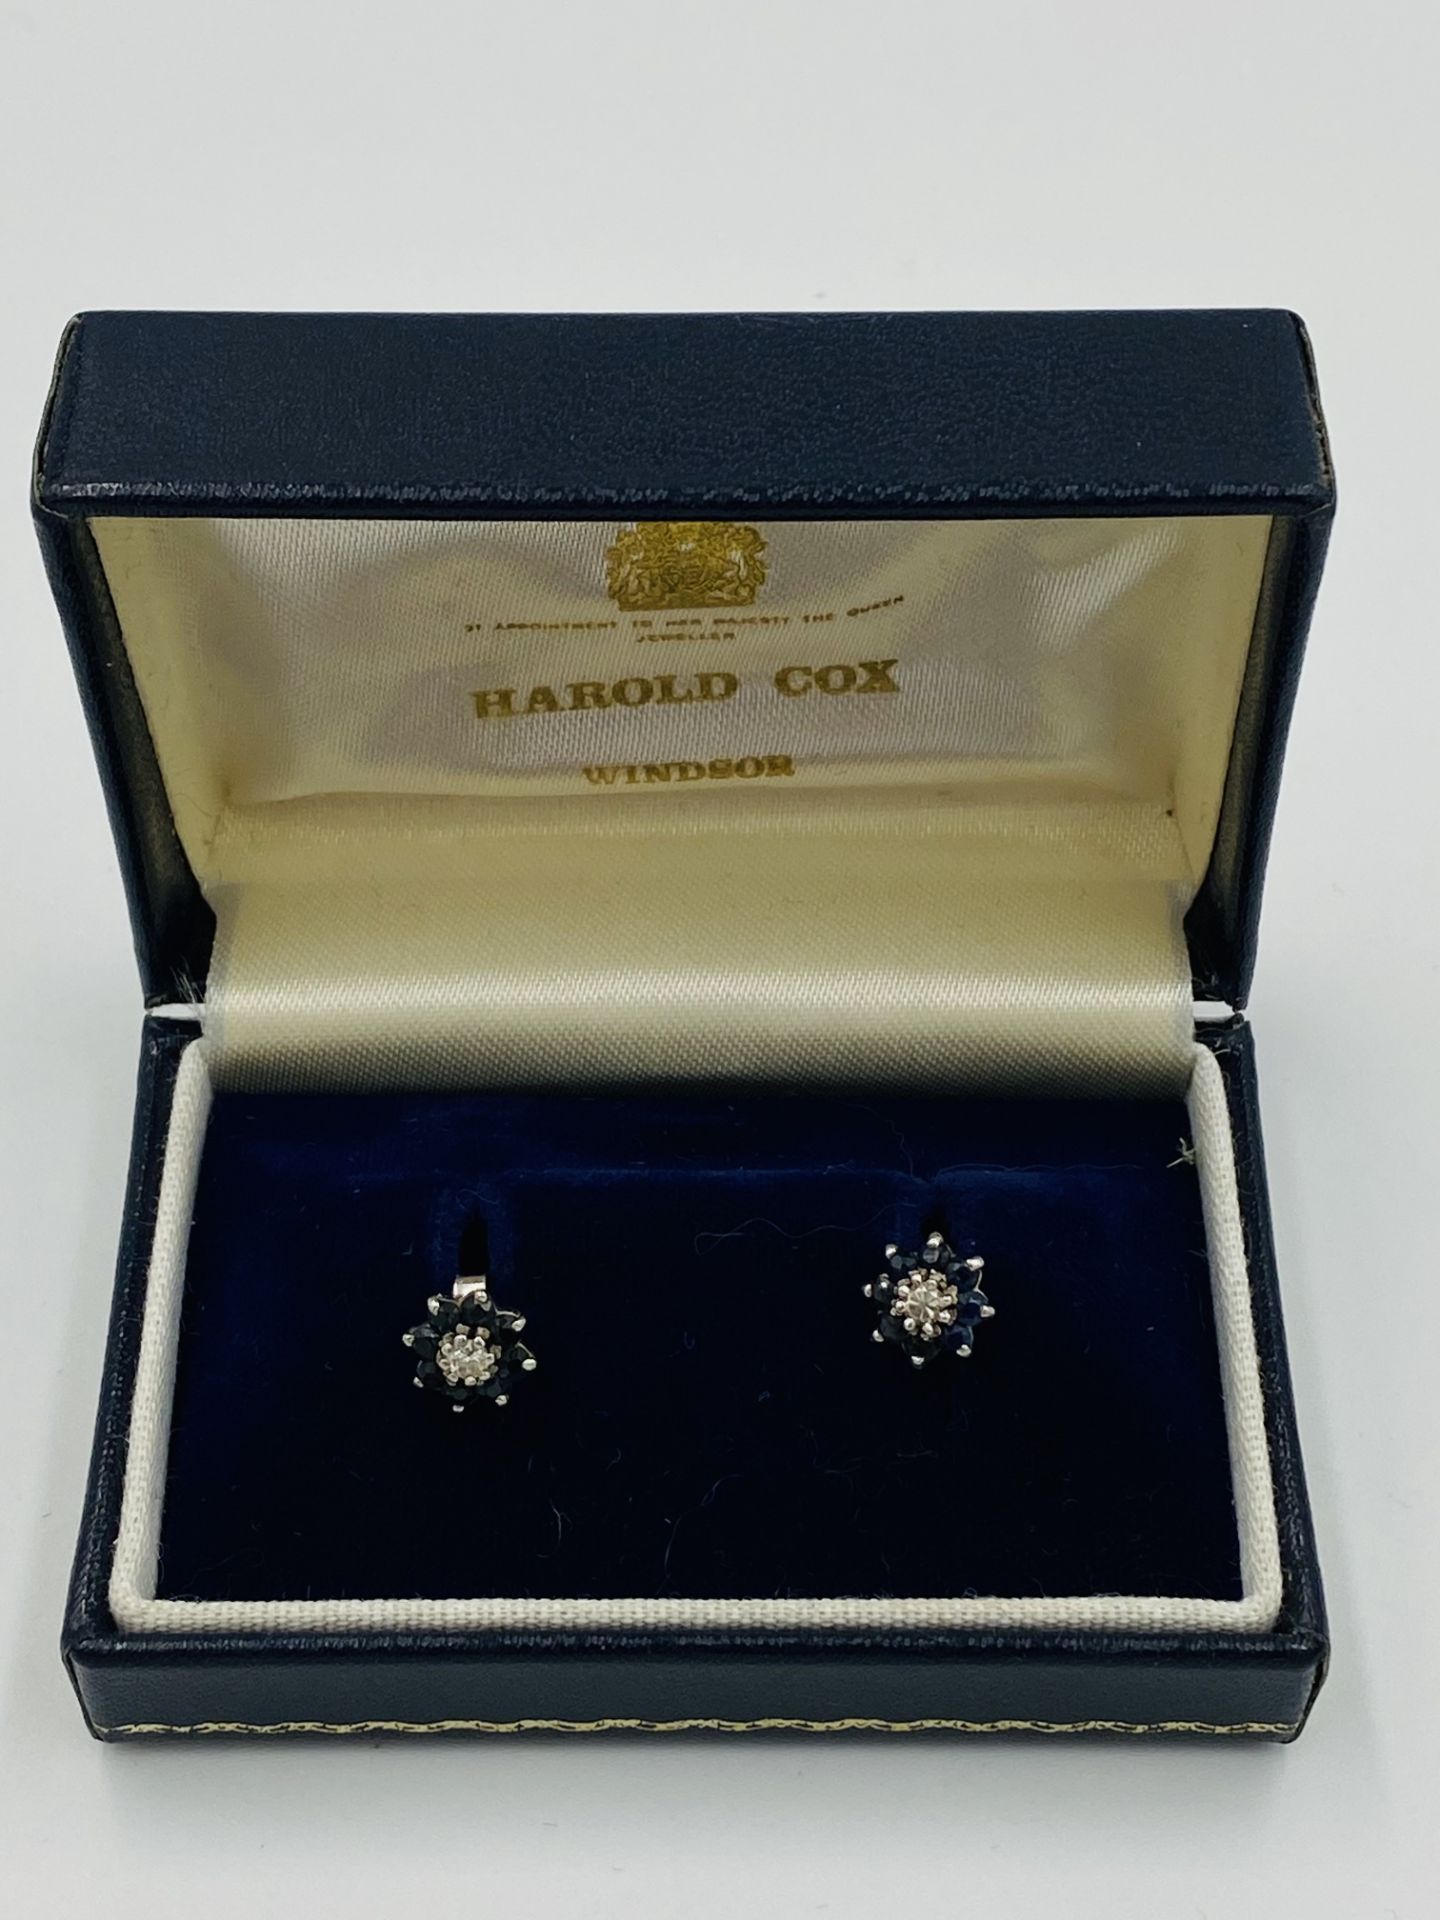 Pair of diamond and sapphire earrings - Image 3 of 3